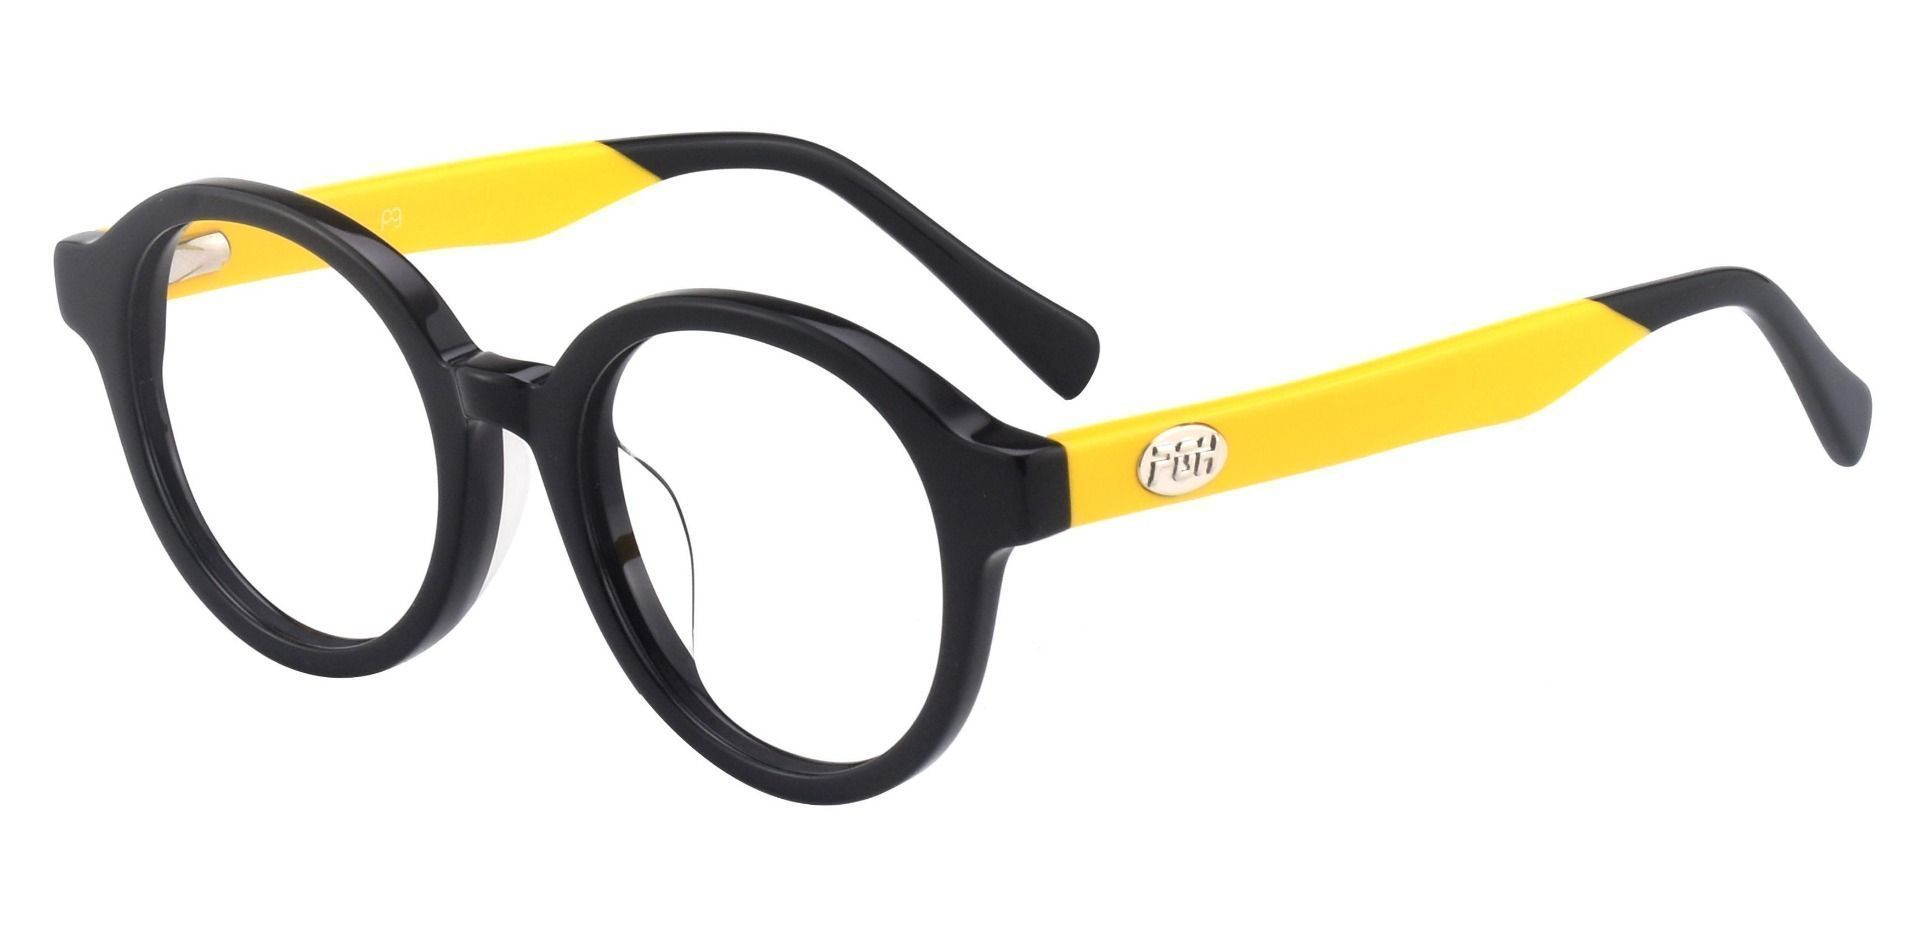 Champ Round Reading Glasses - The Frame Is Black And Gold